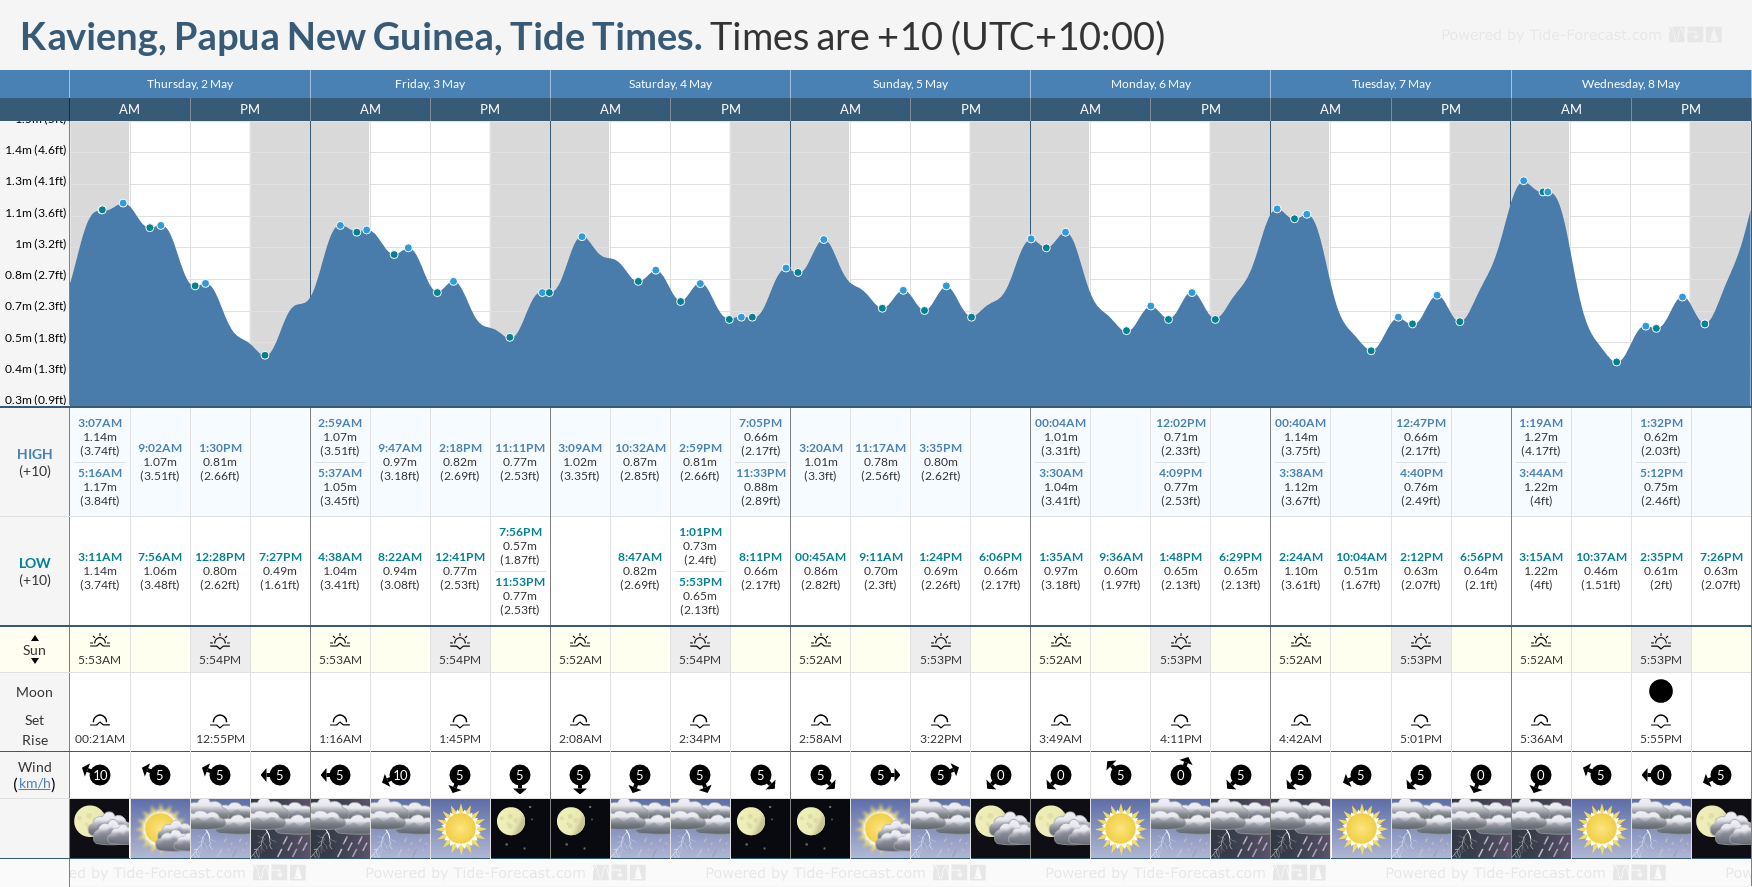 Kavieng, Papua New Guinea Tide Chart including high and low tide times for the next 7 days